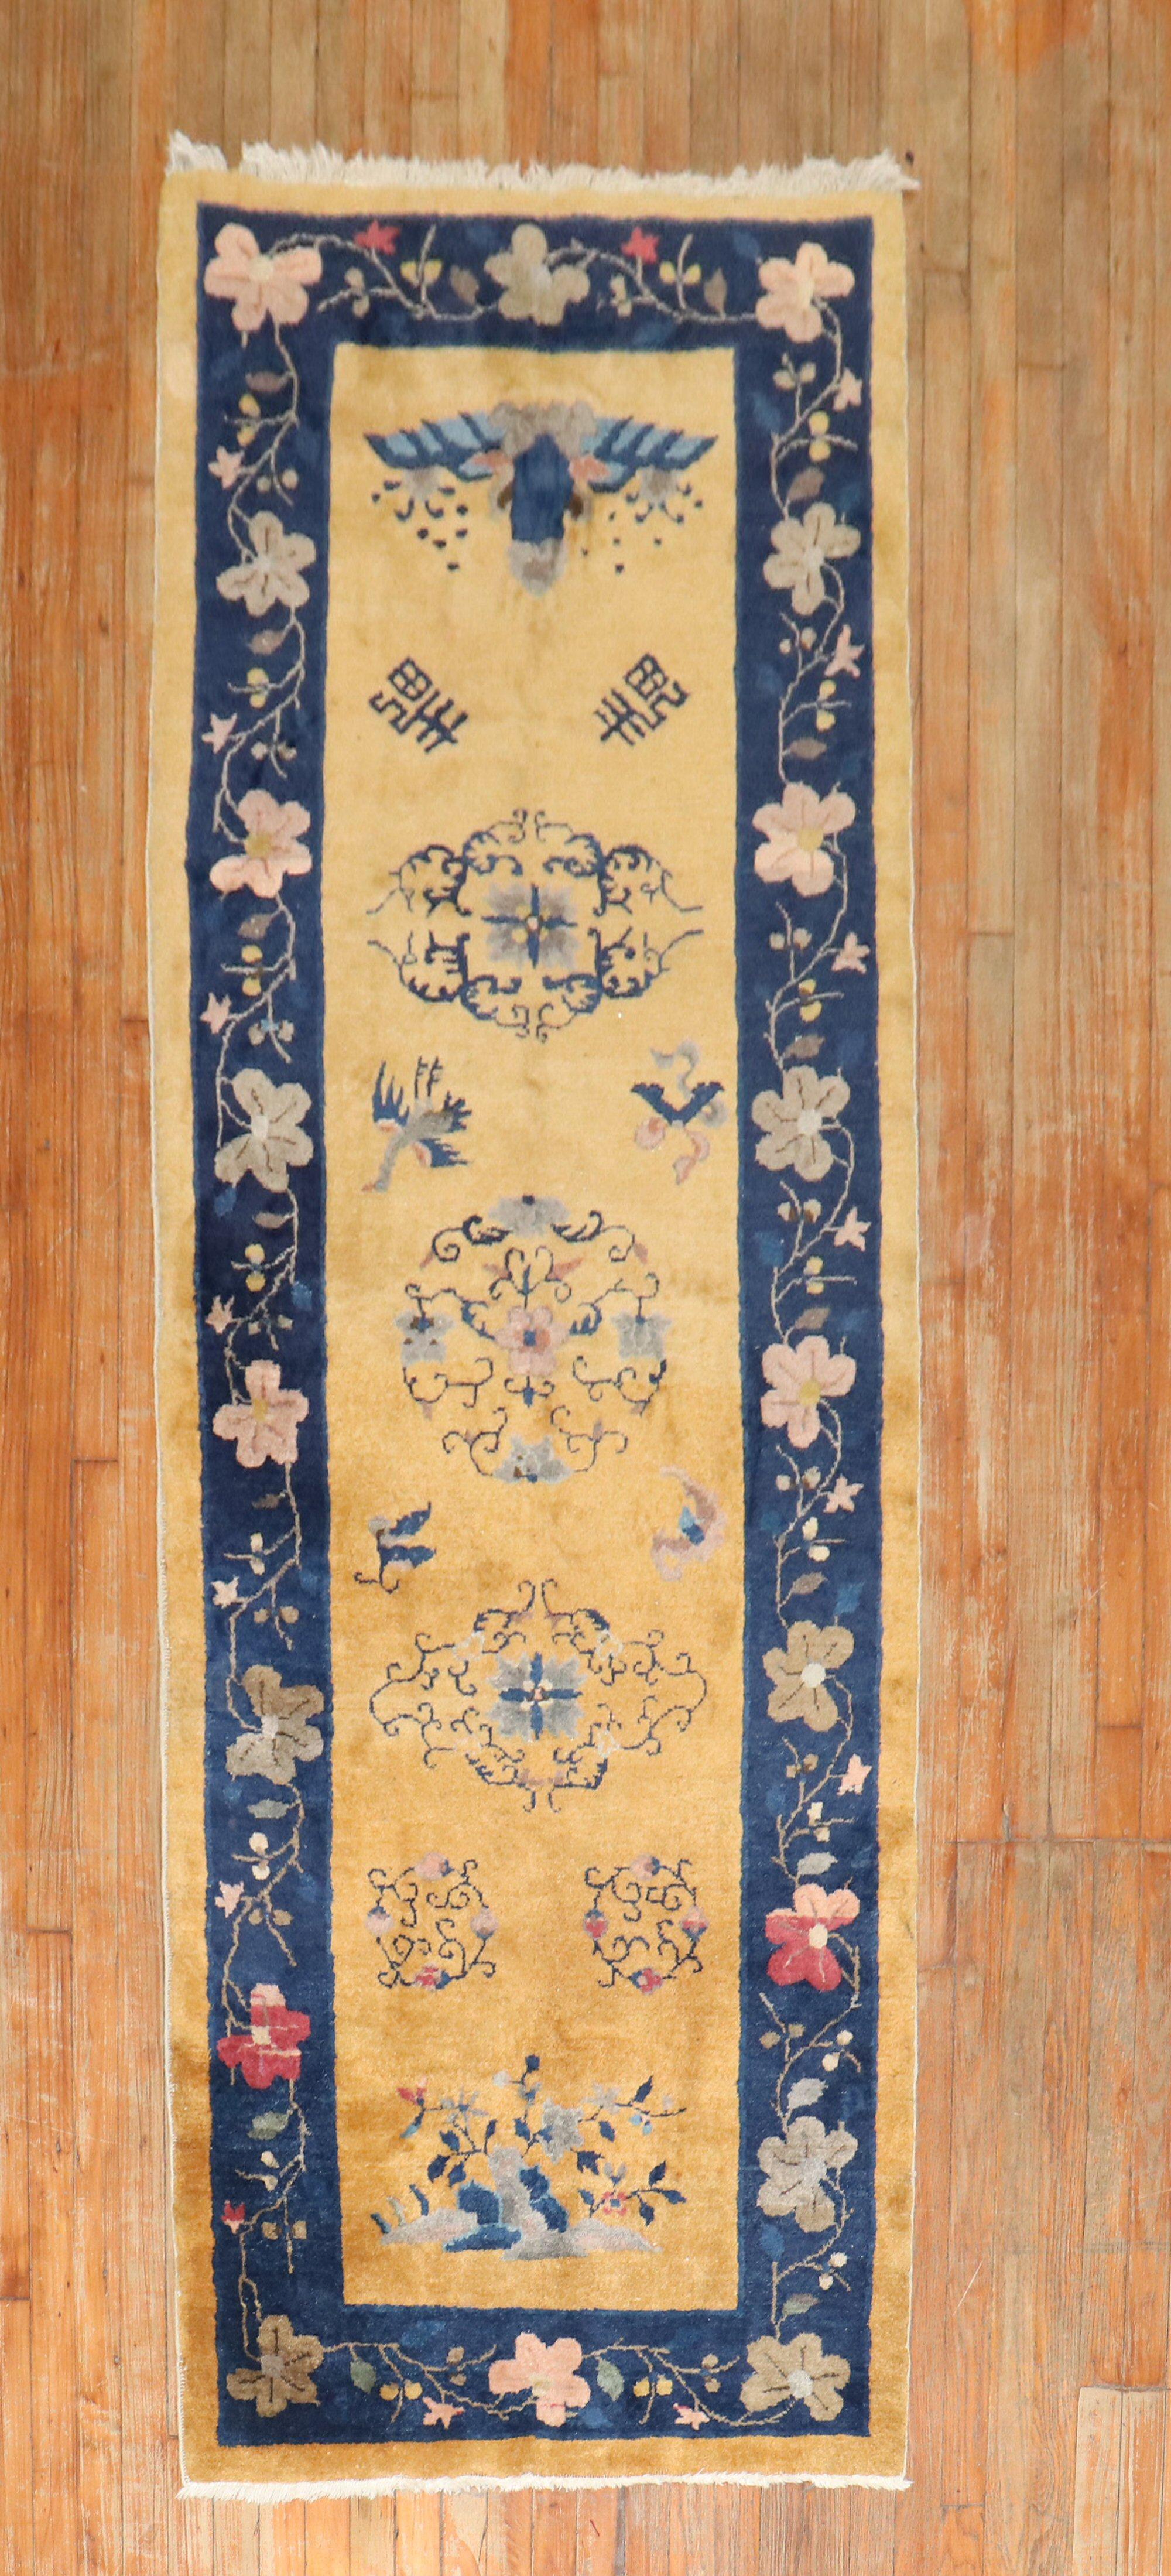 Beautiful Chinese Art Deco runner in yellow and navy

Measures: 3'1